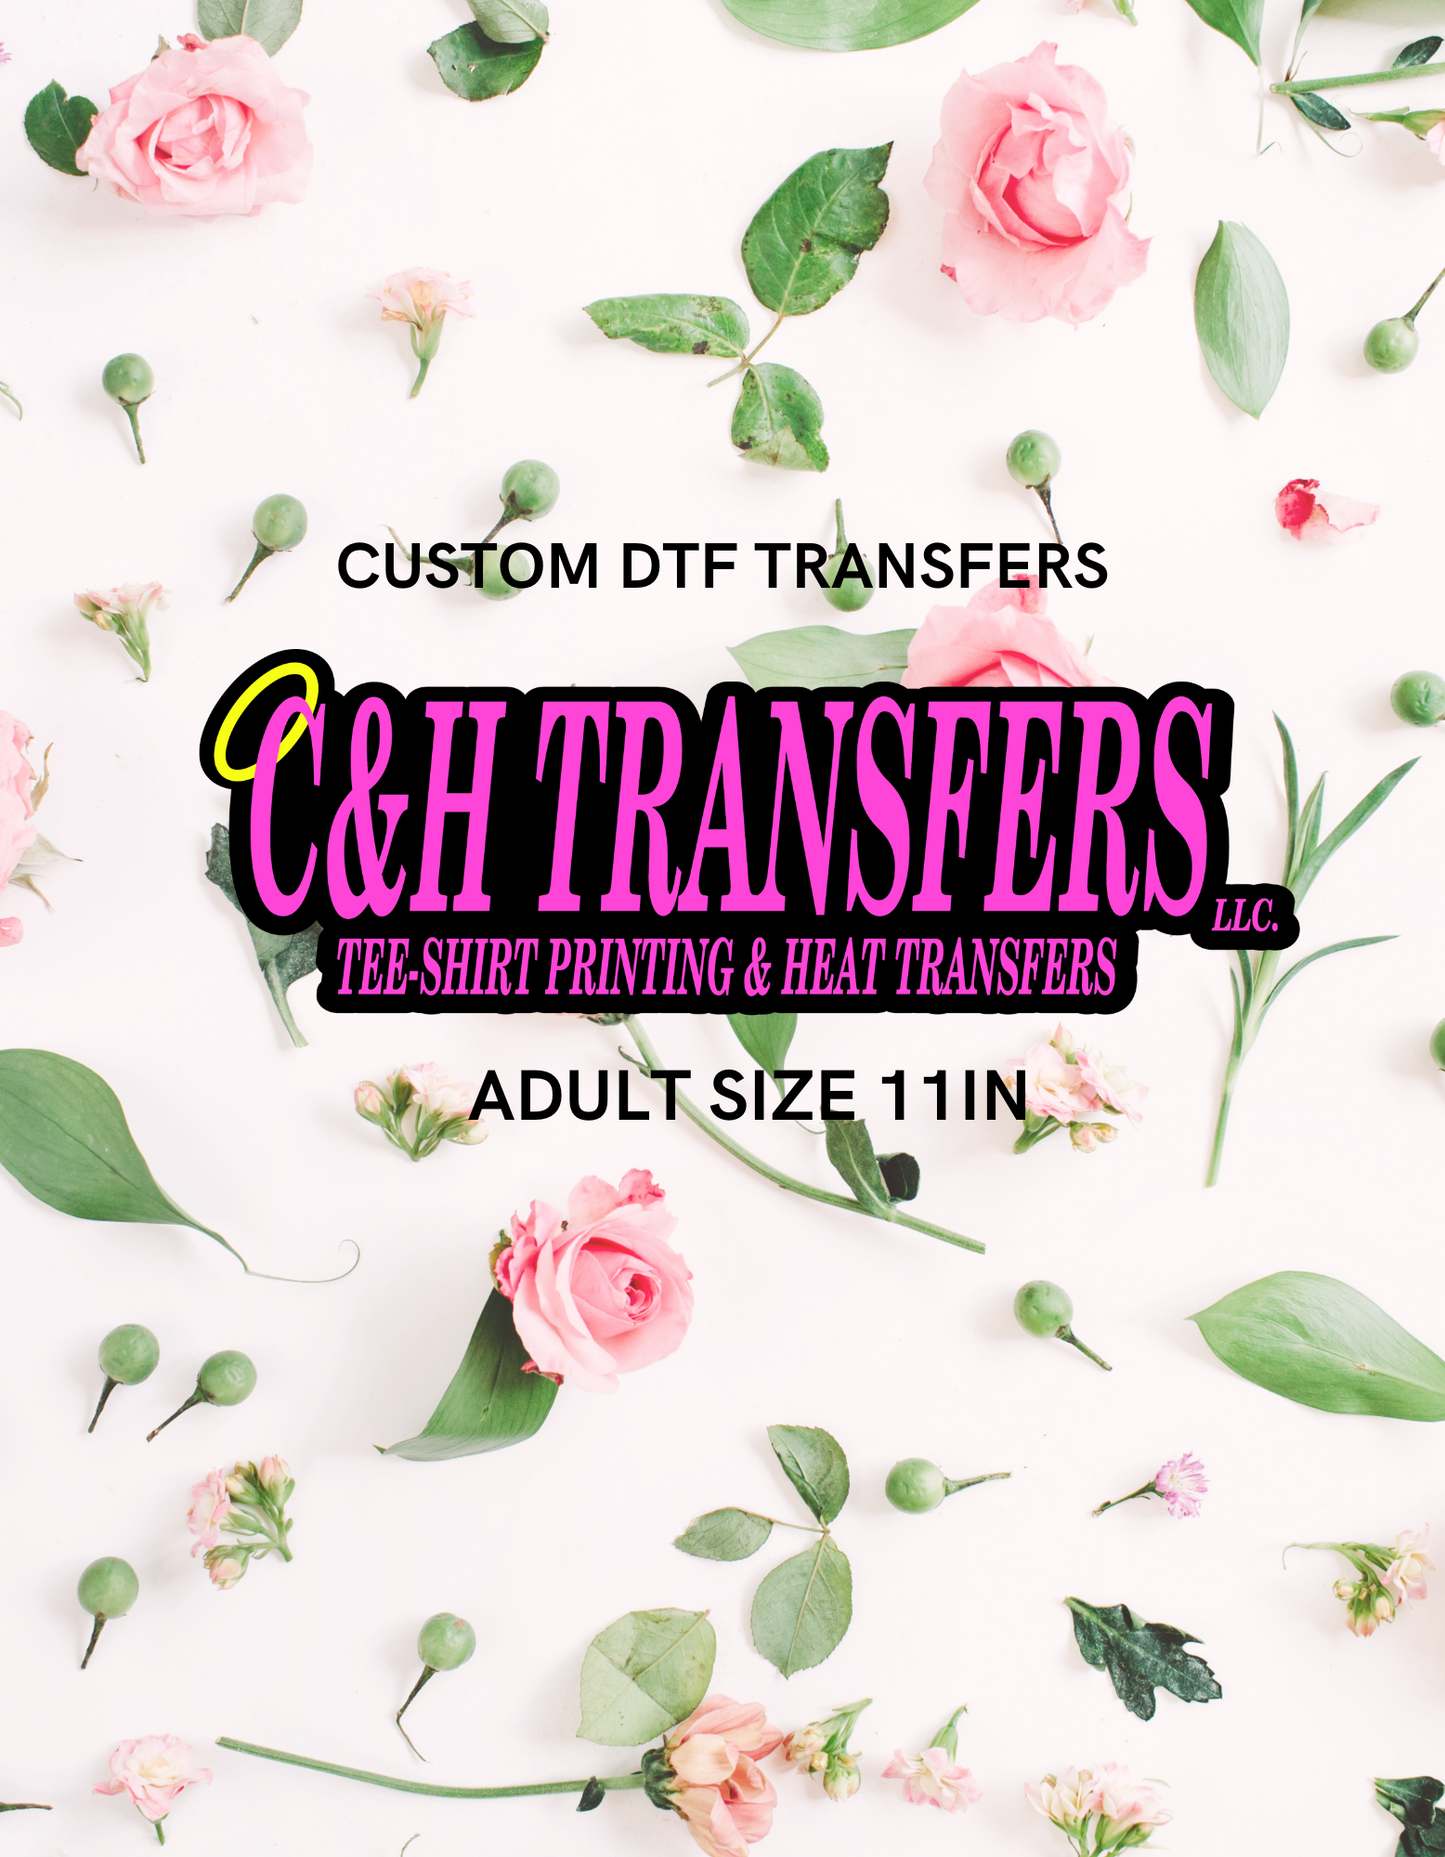 CUSTOM DTF TRANSFERS ADULT SIZE 11IN